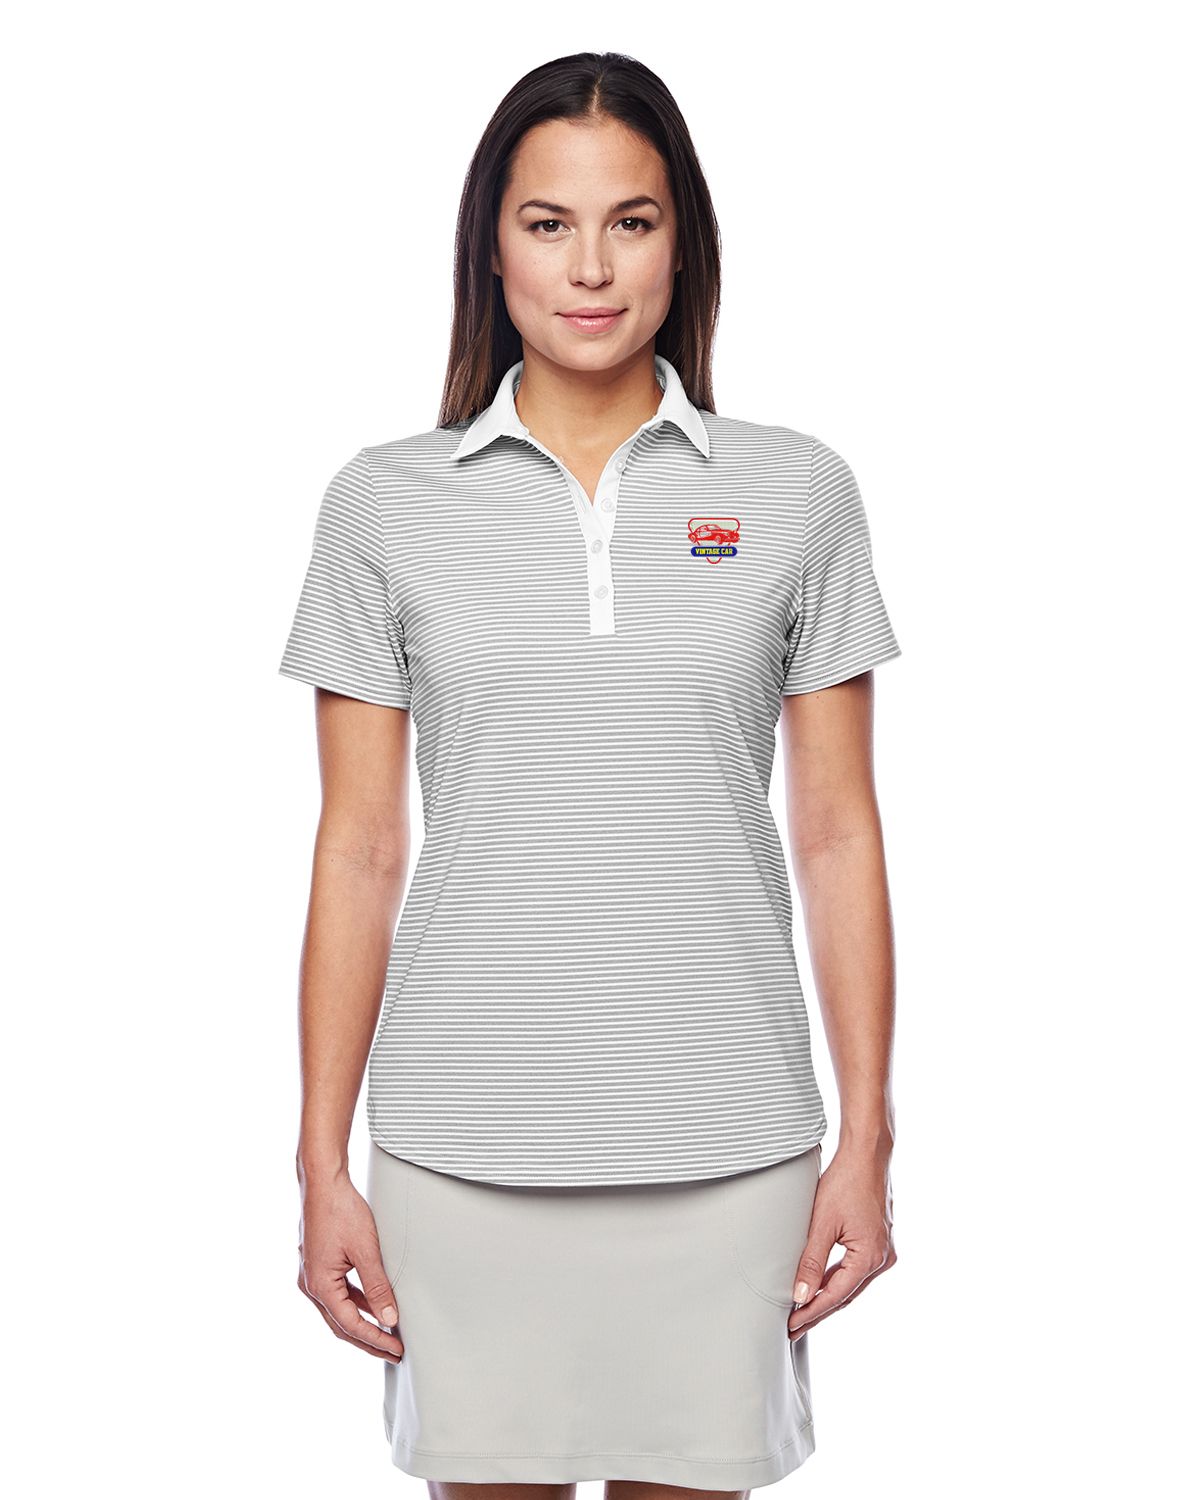 under armour playoff stripe polo